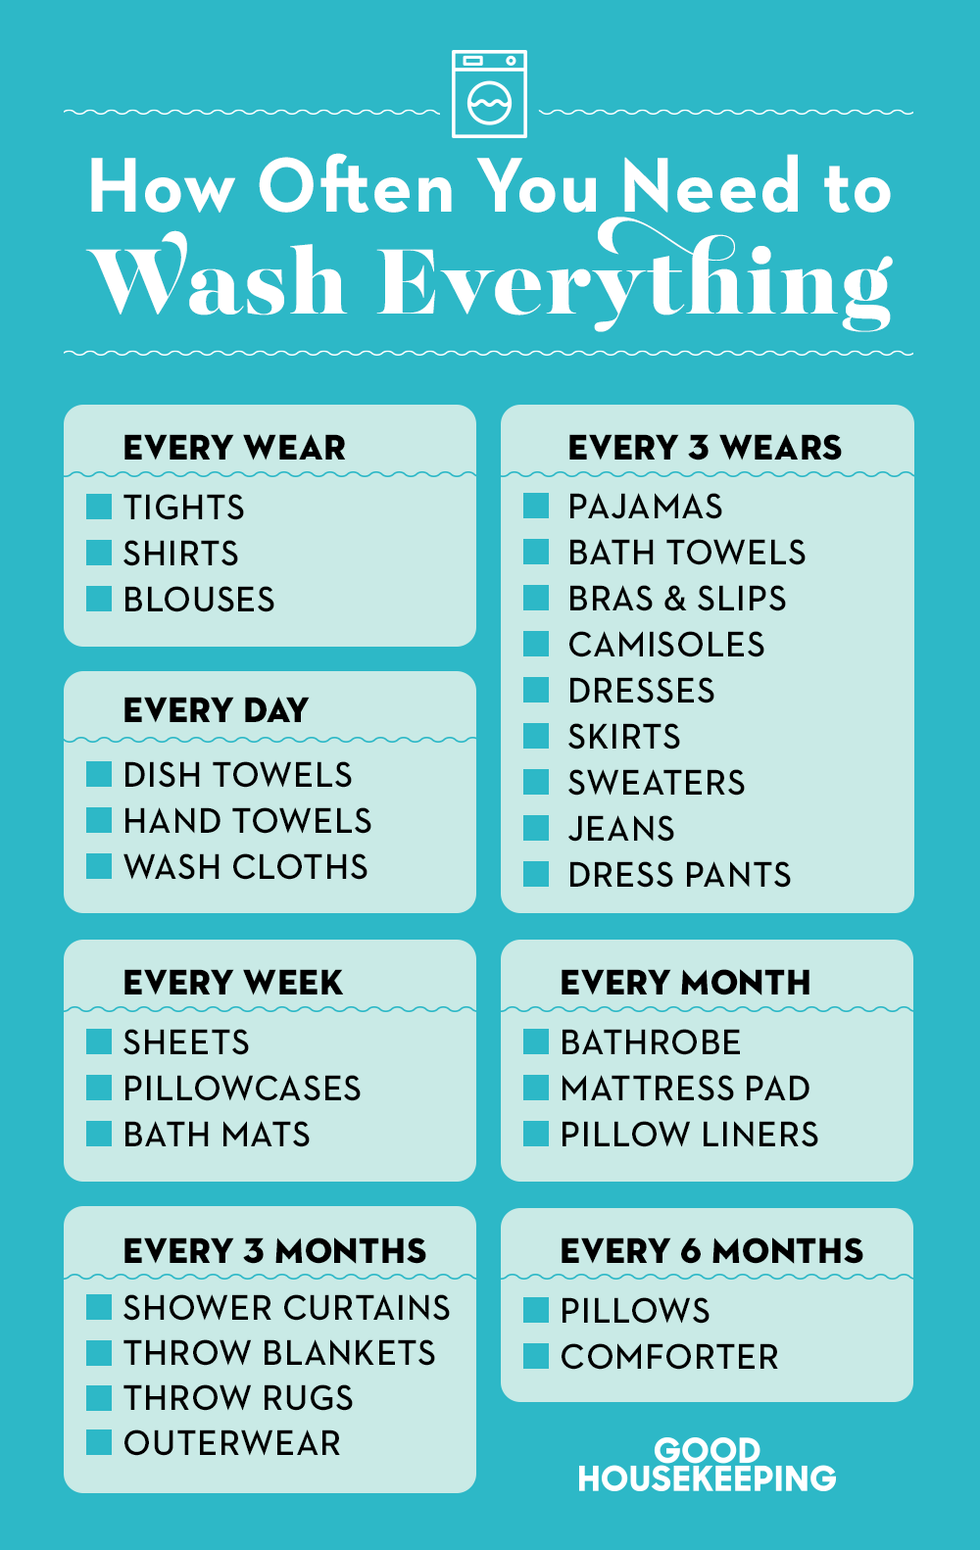 How Often Should You Wash Your Dish Towels?